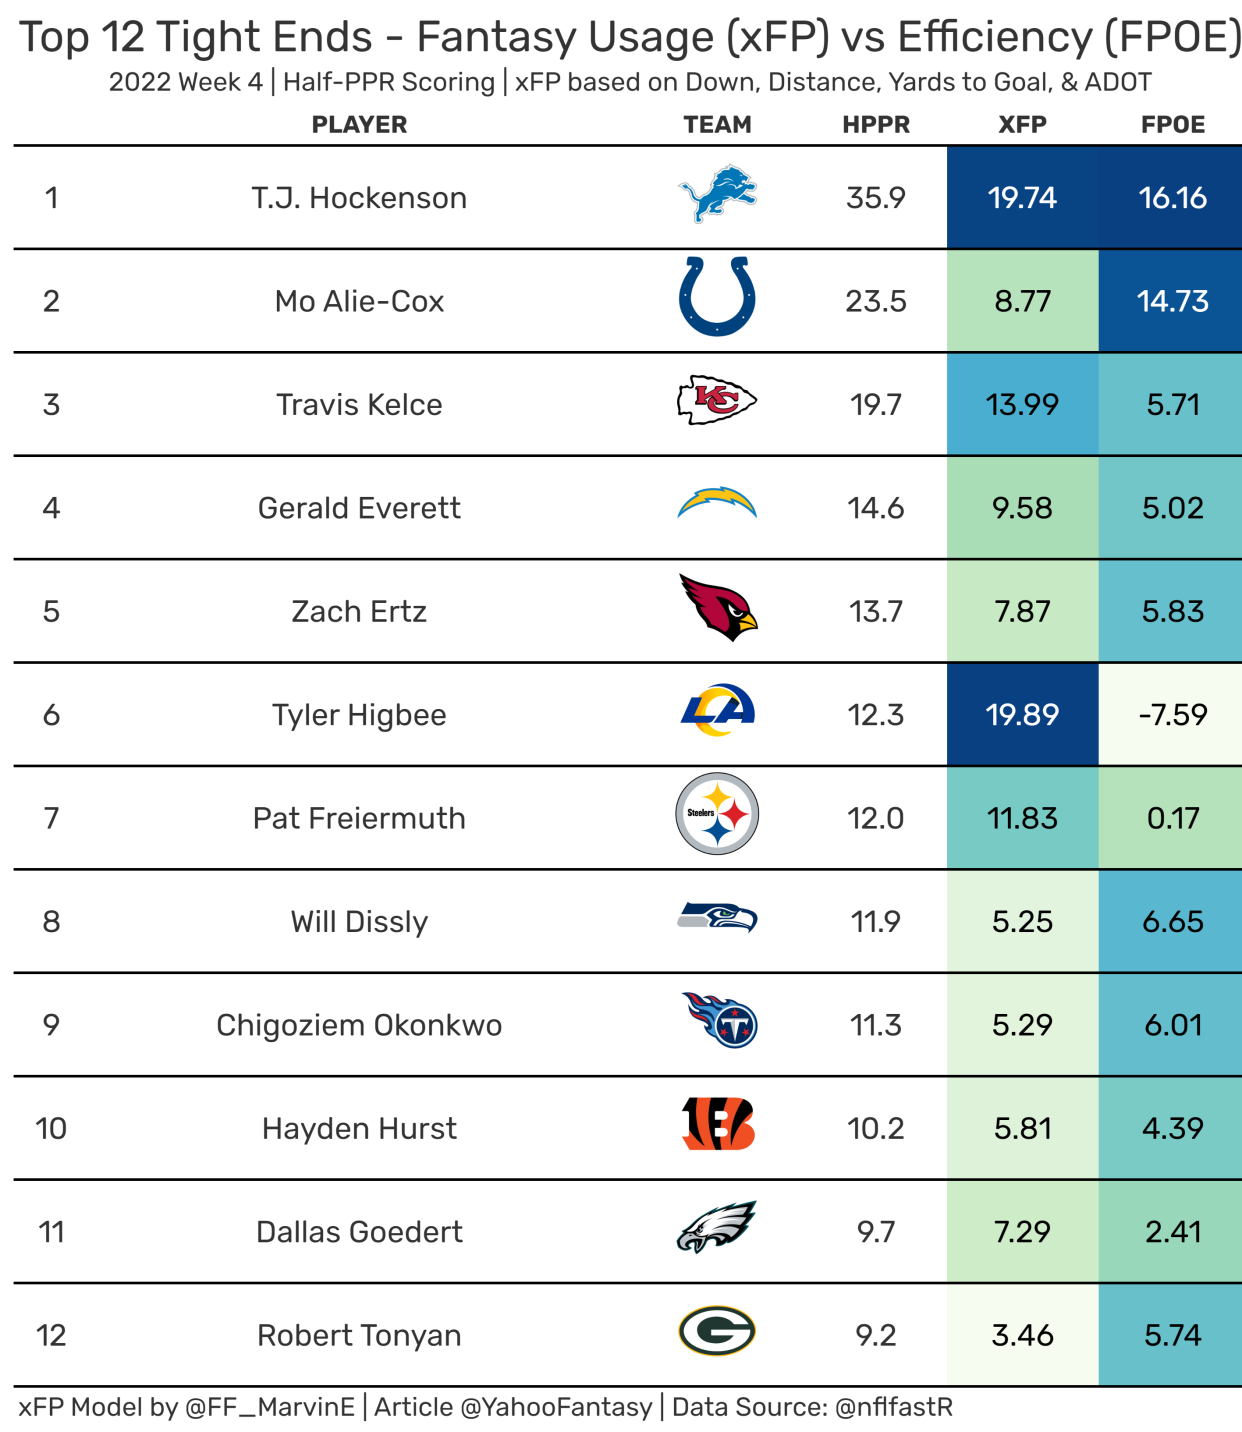 Top-12 Fantasy Tight Ends from Week 4. (Data used provided by nflfastR)